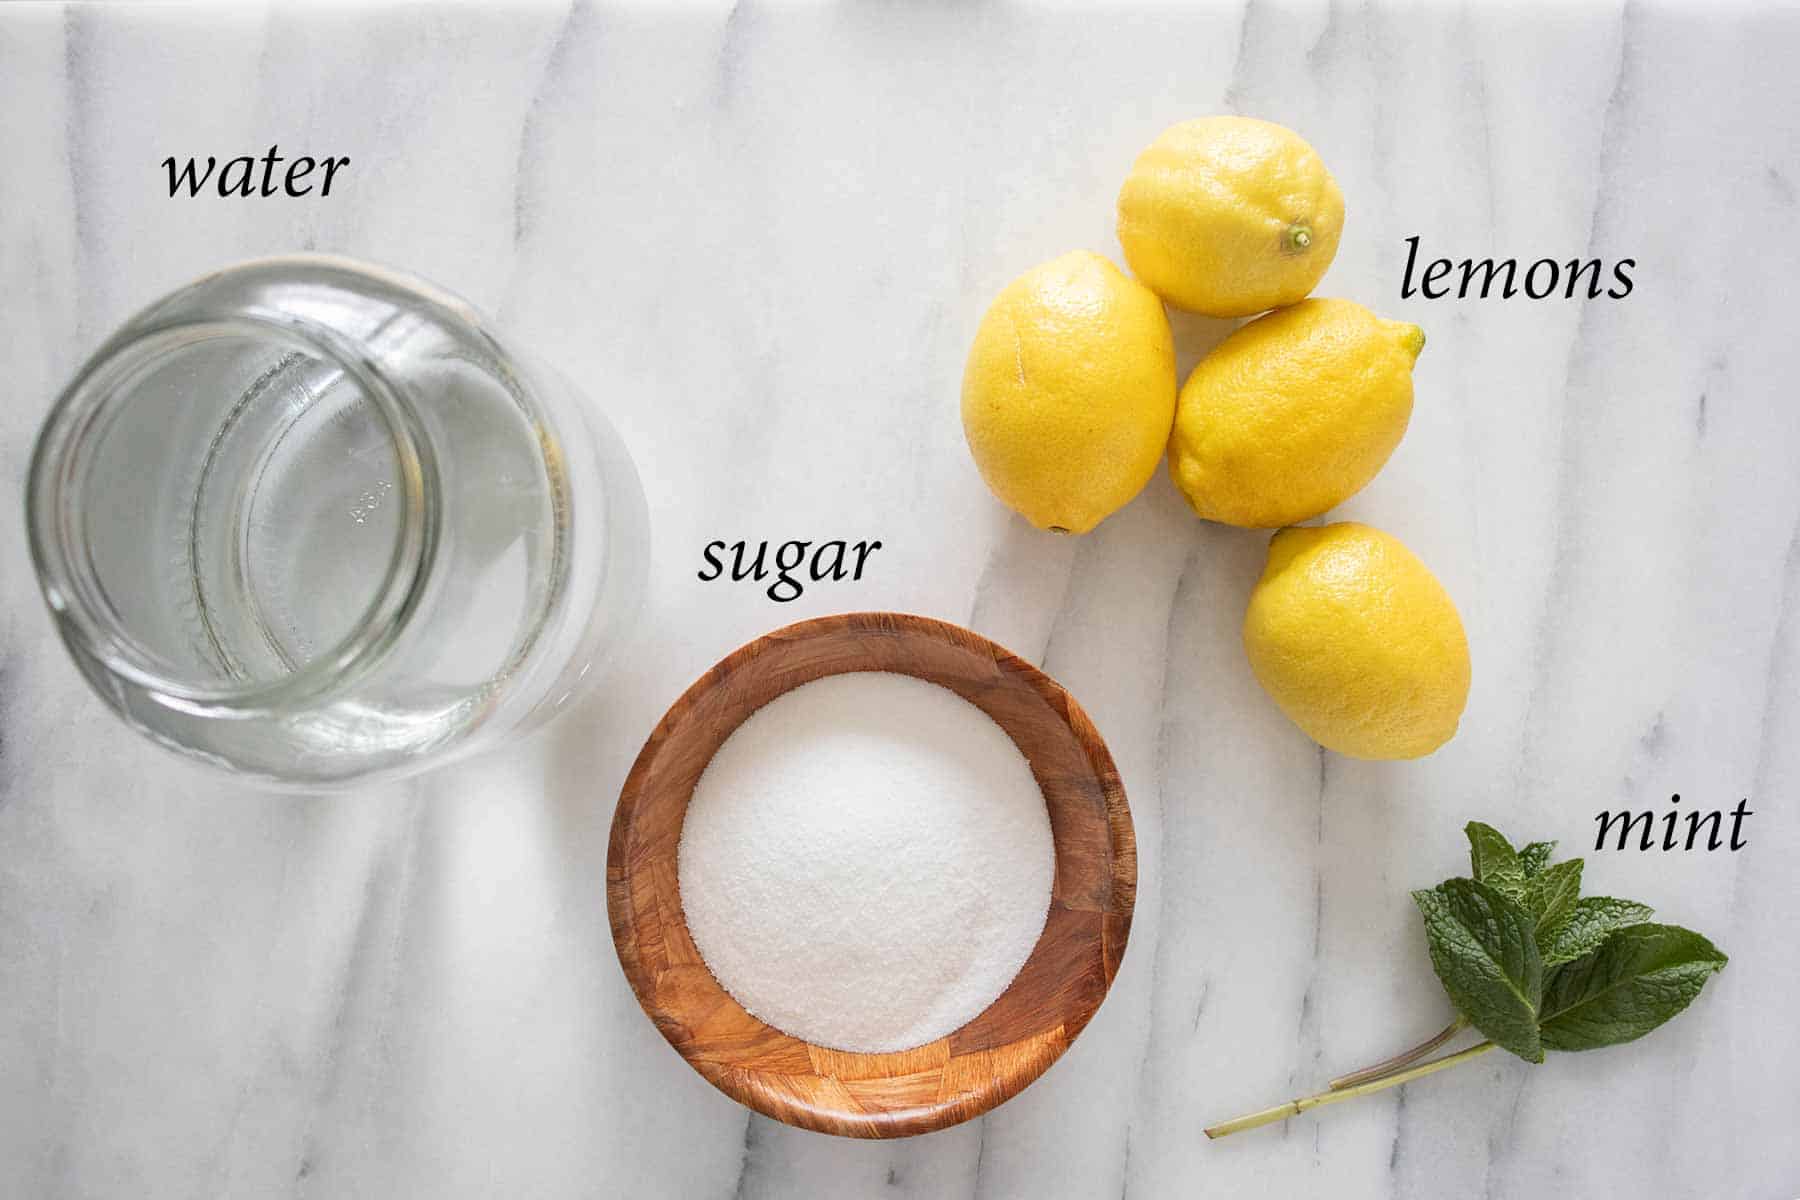 all the ingredients needed to make a lemon mint juice.